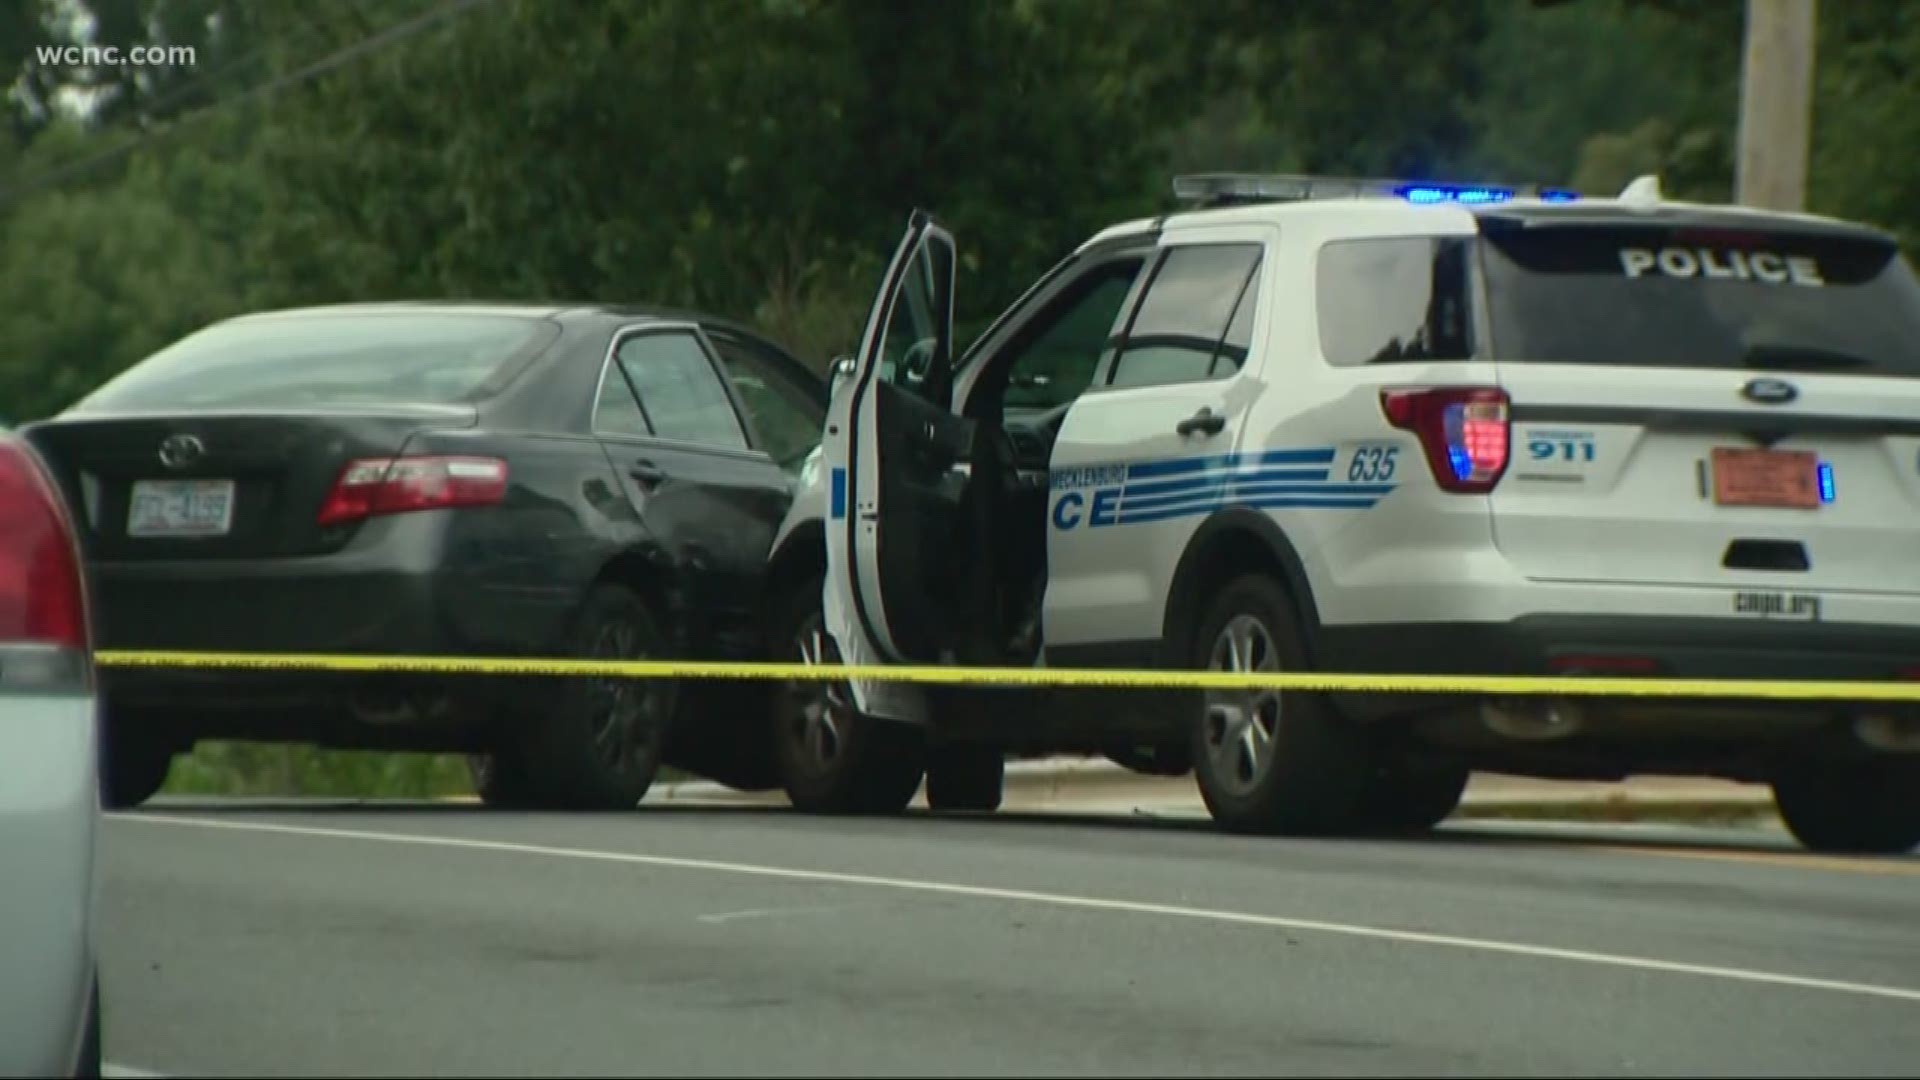 Three people were detained after a police chase ended in a crash in east Charlotte Thursday afternoon.